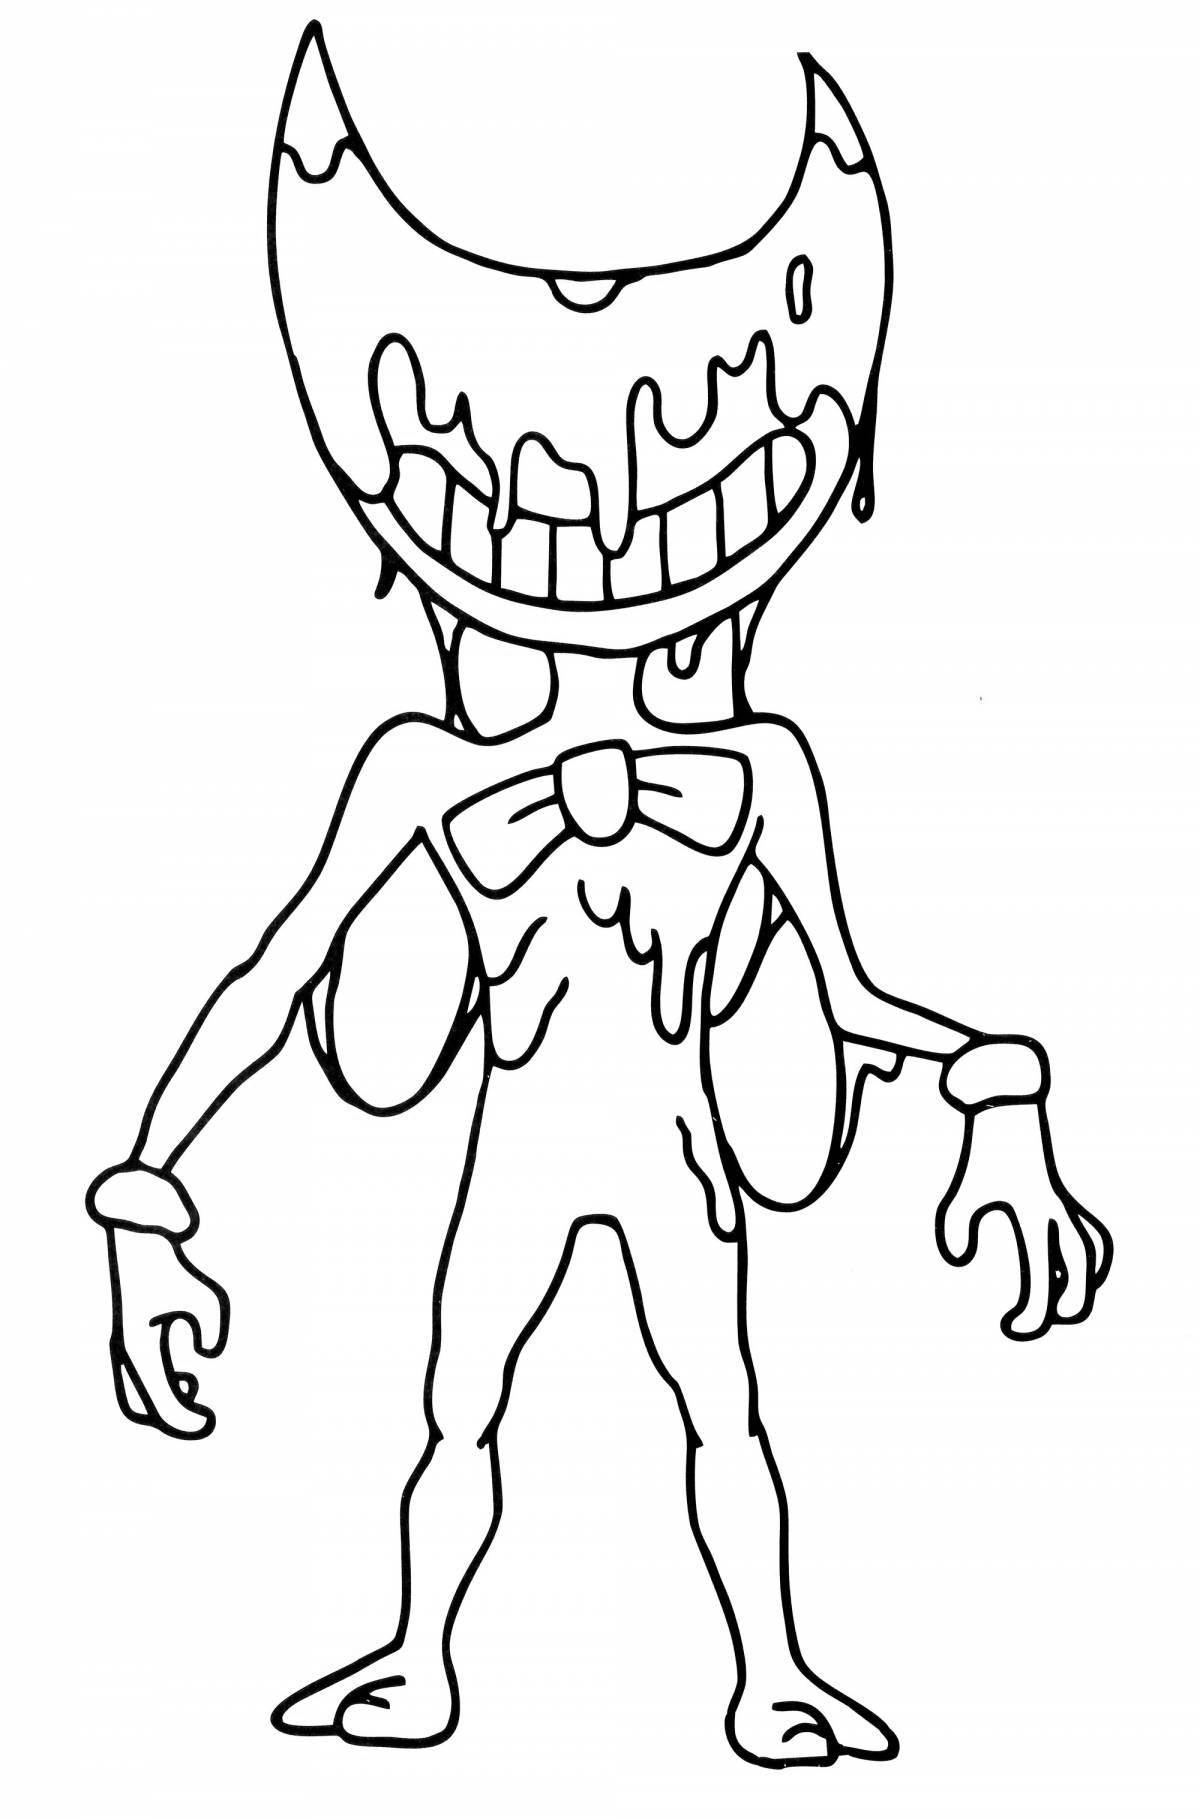 Bandy scary coloring page